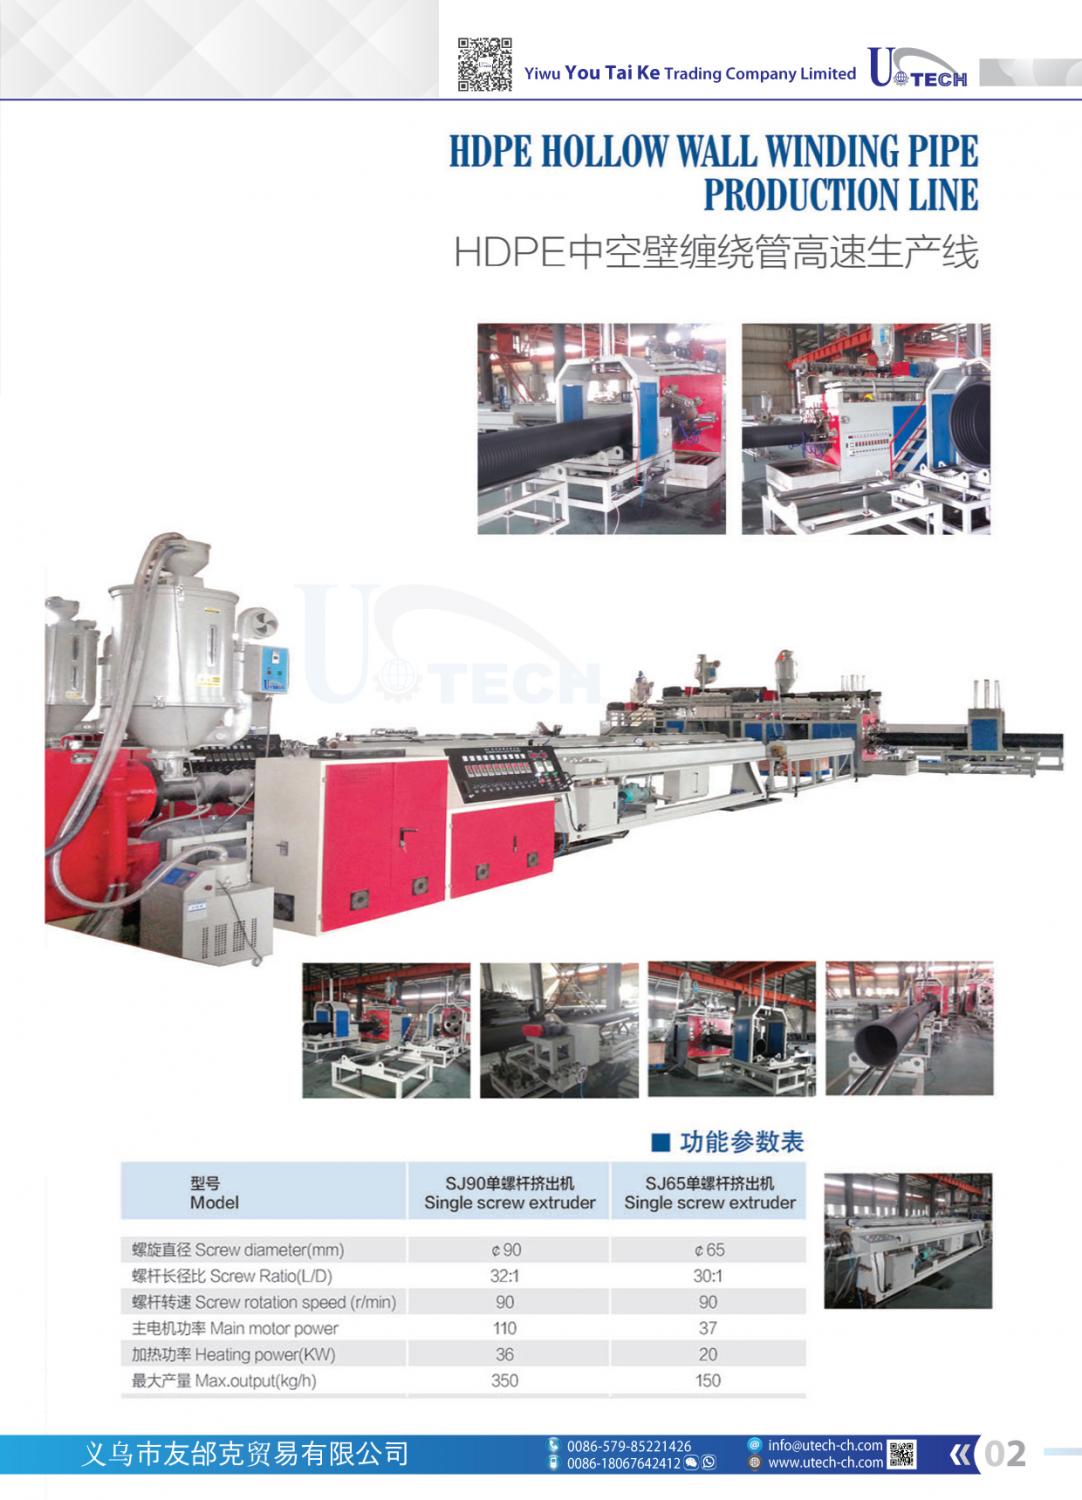 HDPE HOLLOW WALL WINDING PIPE PRODUCTION LINE